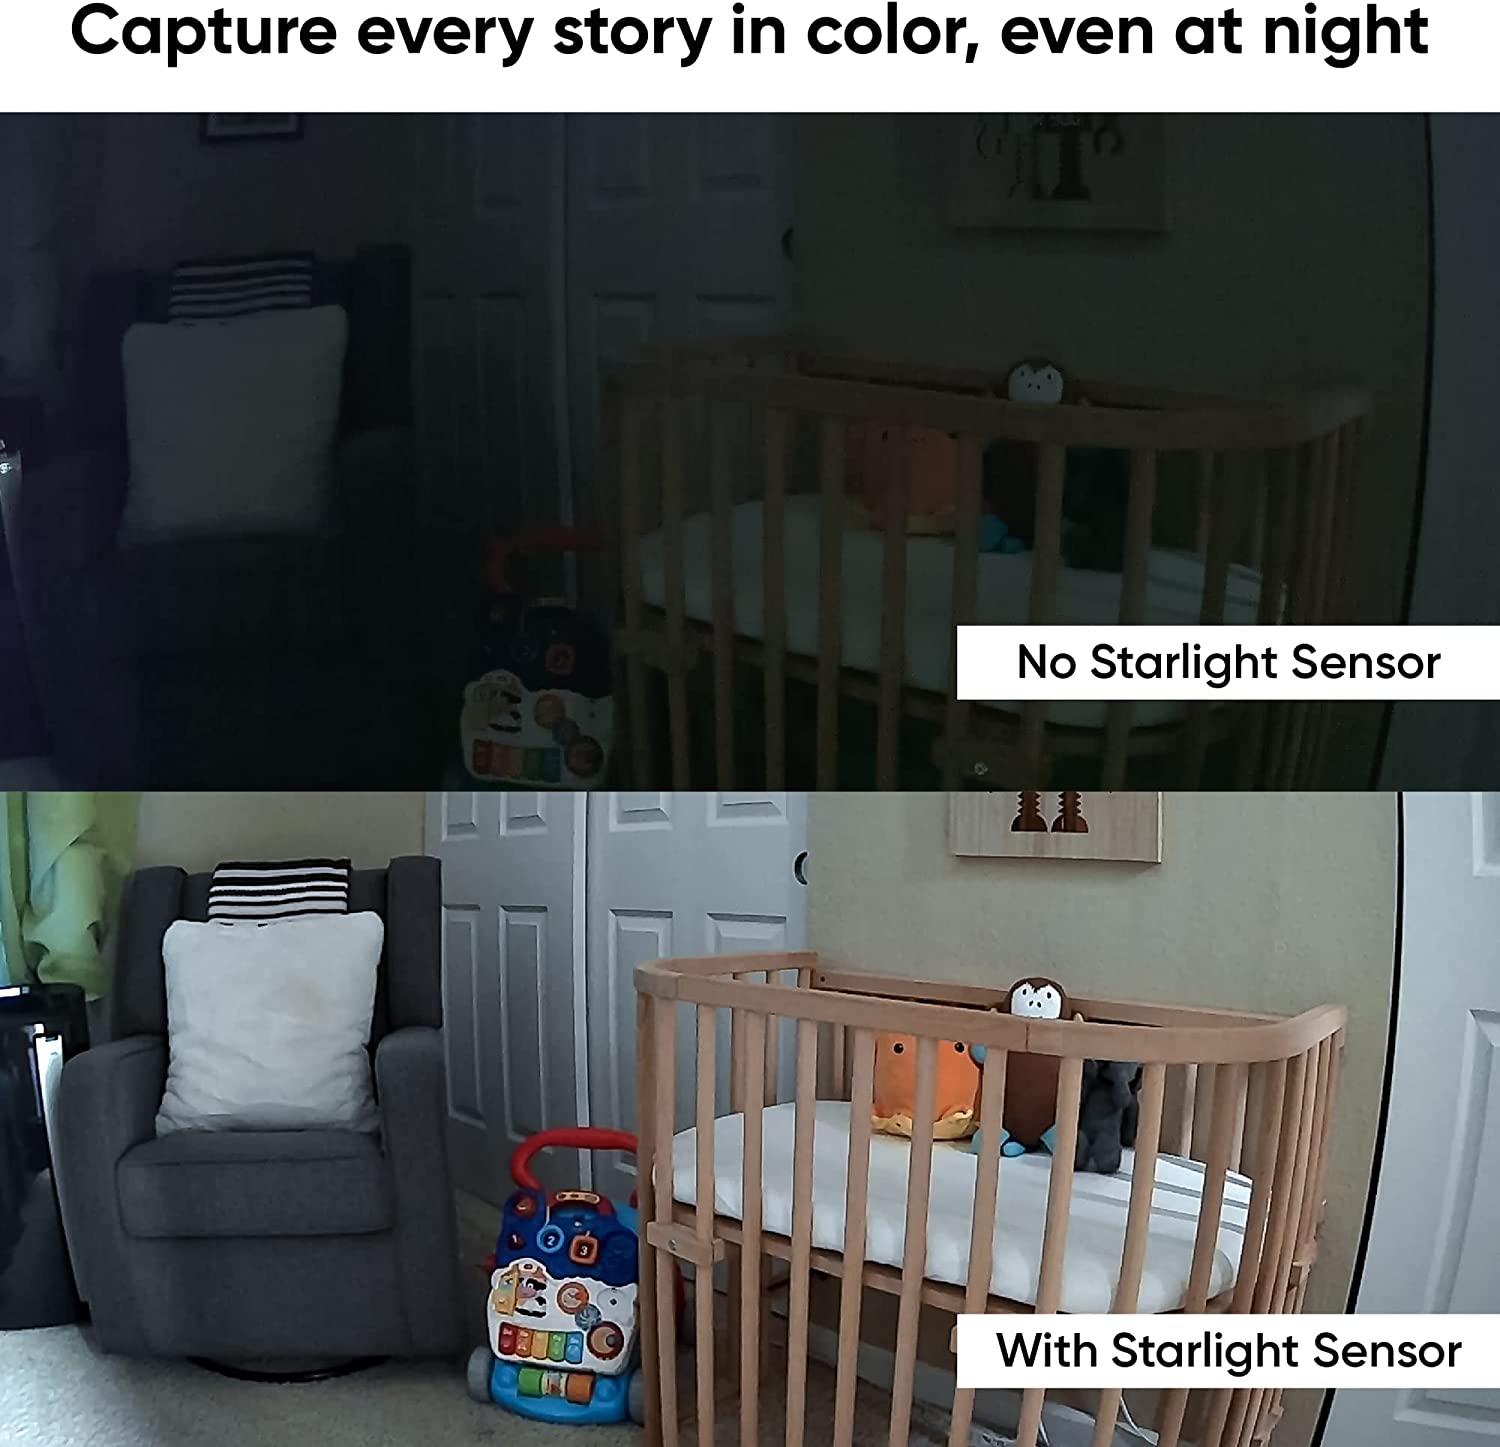 Comparison image of baby crib, no color night vision vs with color night vision. Text overlay "Capture every story in color, even at night."